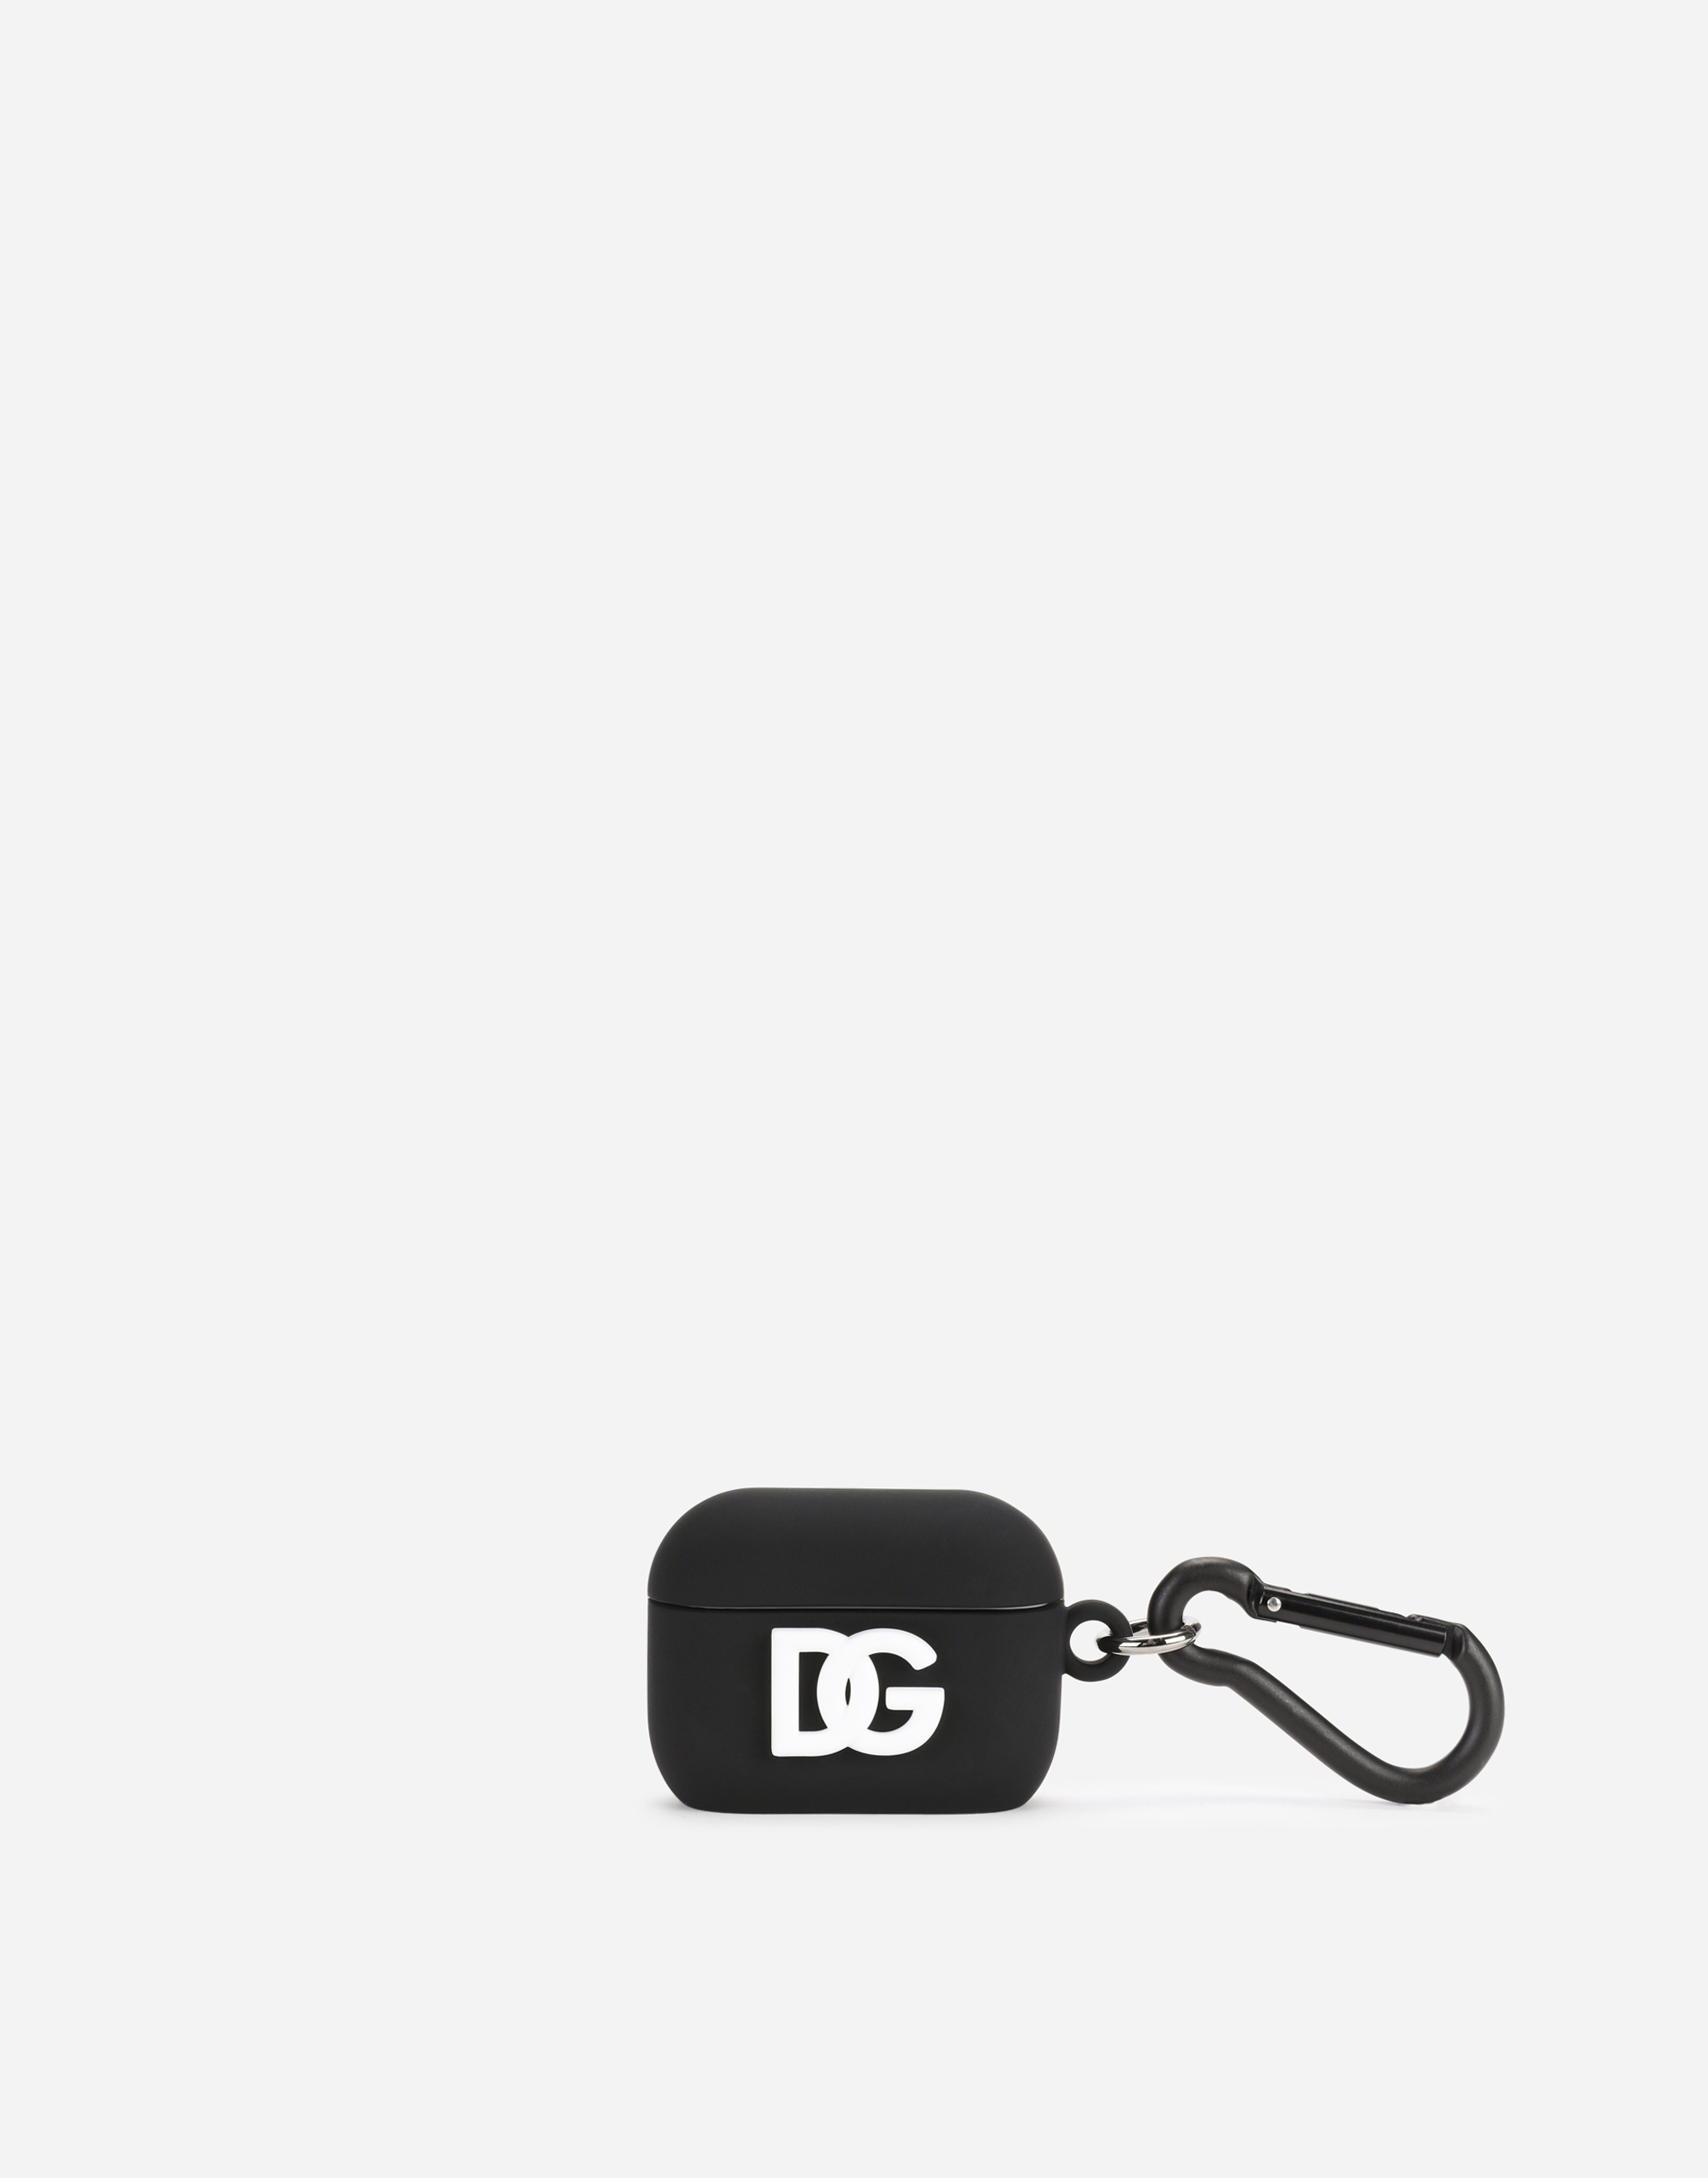 Rubber AirPods Pro case with DG logo in Multicolor